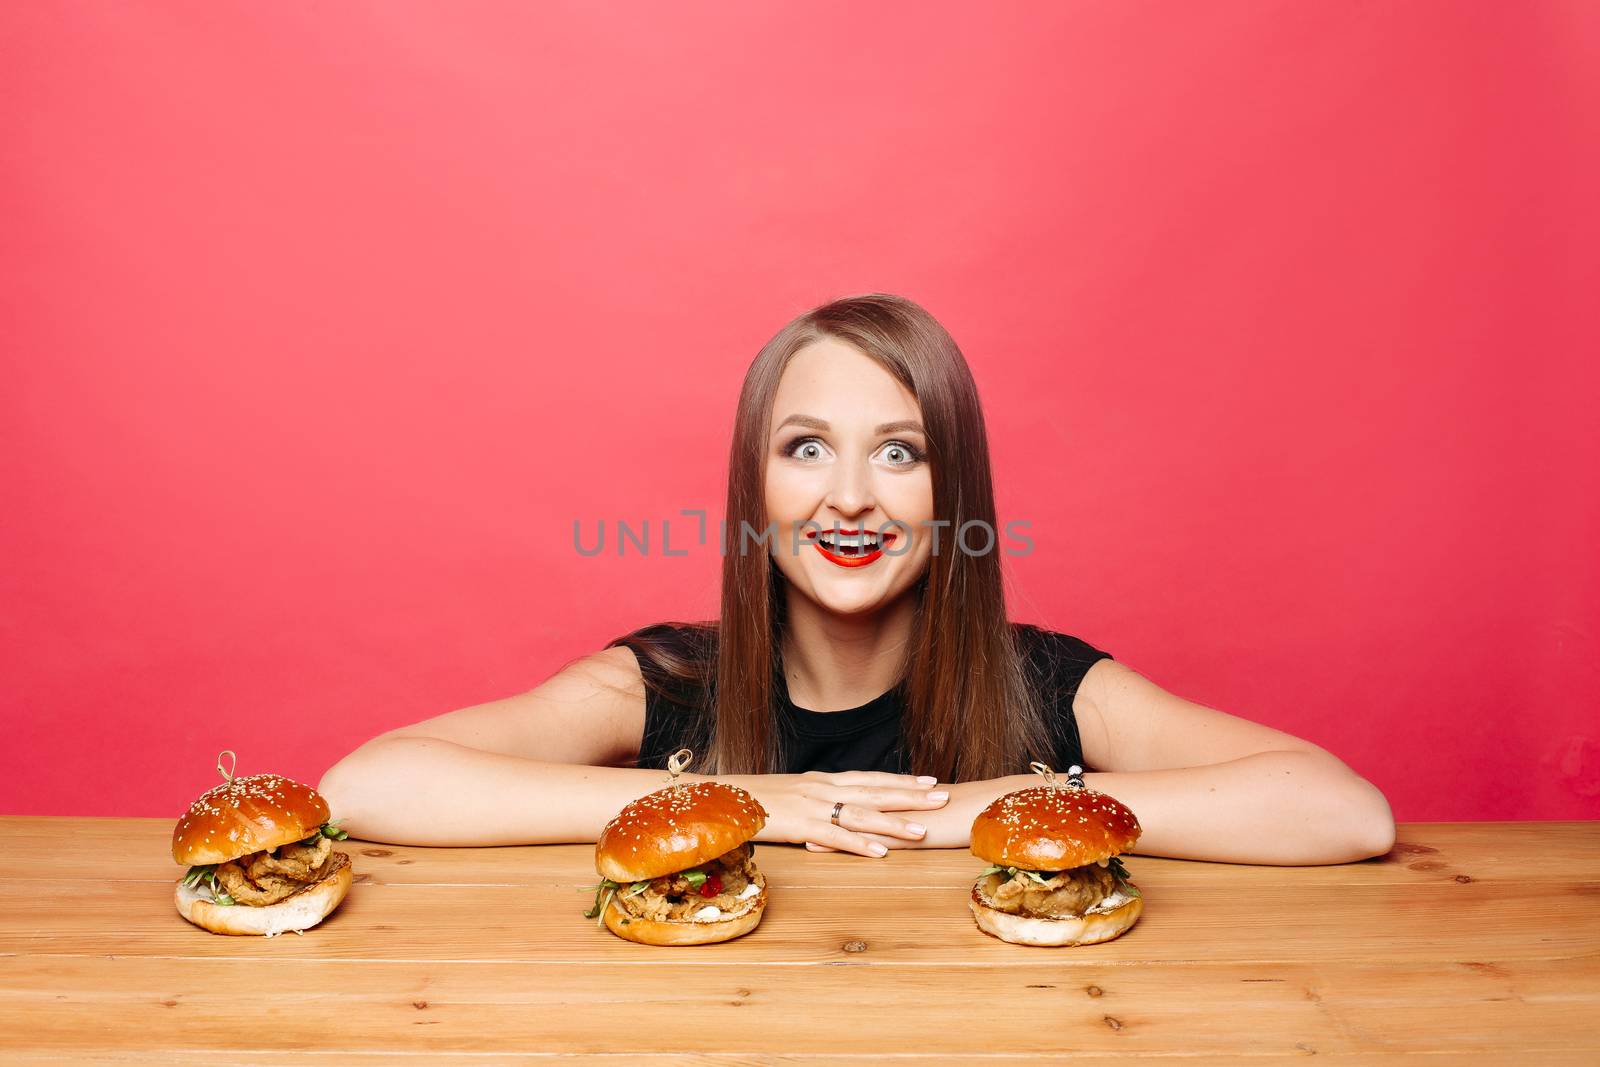 Happy excited woman smiling at camera with burgers on table in front of her. by StudioLucky